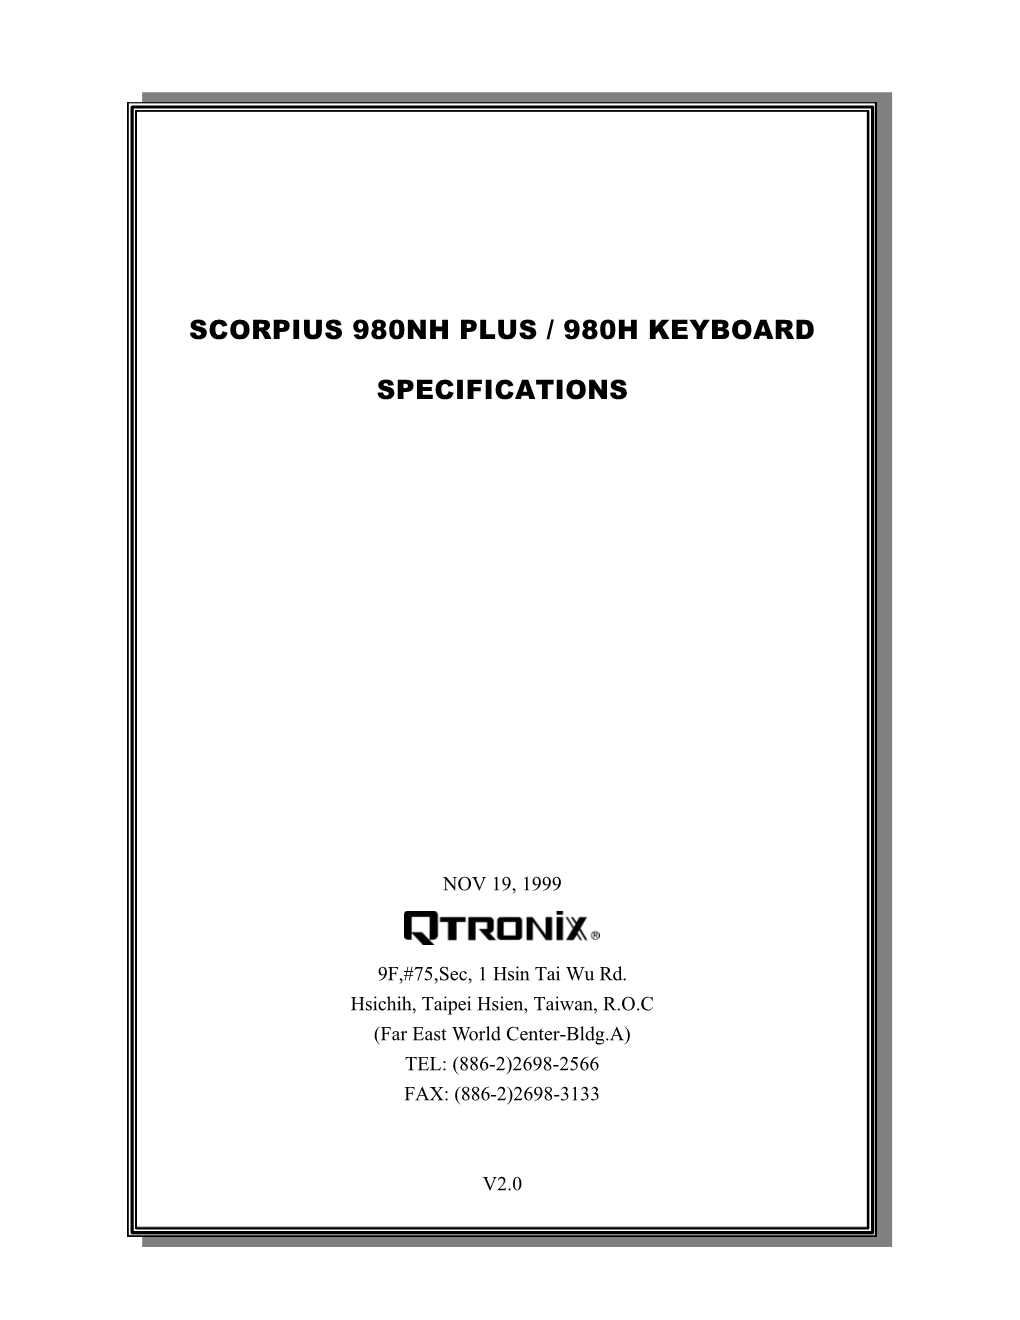 Scorpius 980Nh Plus / 980H Keyboard Specifications